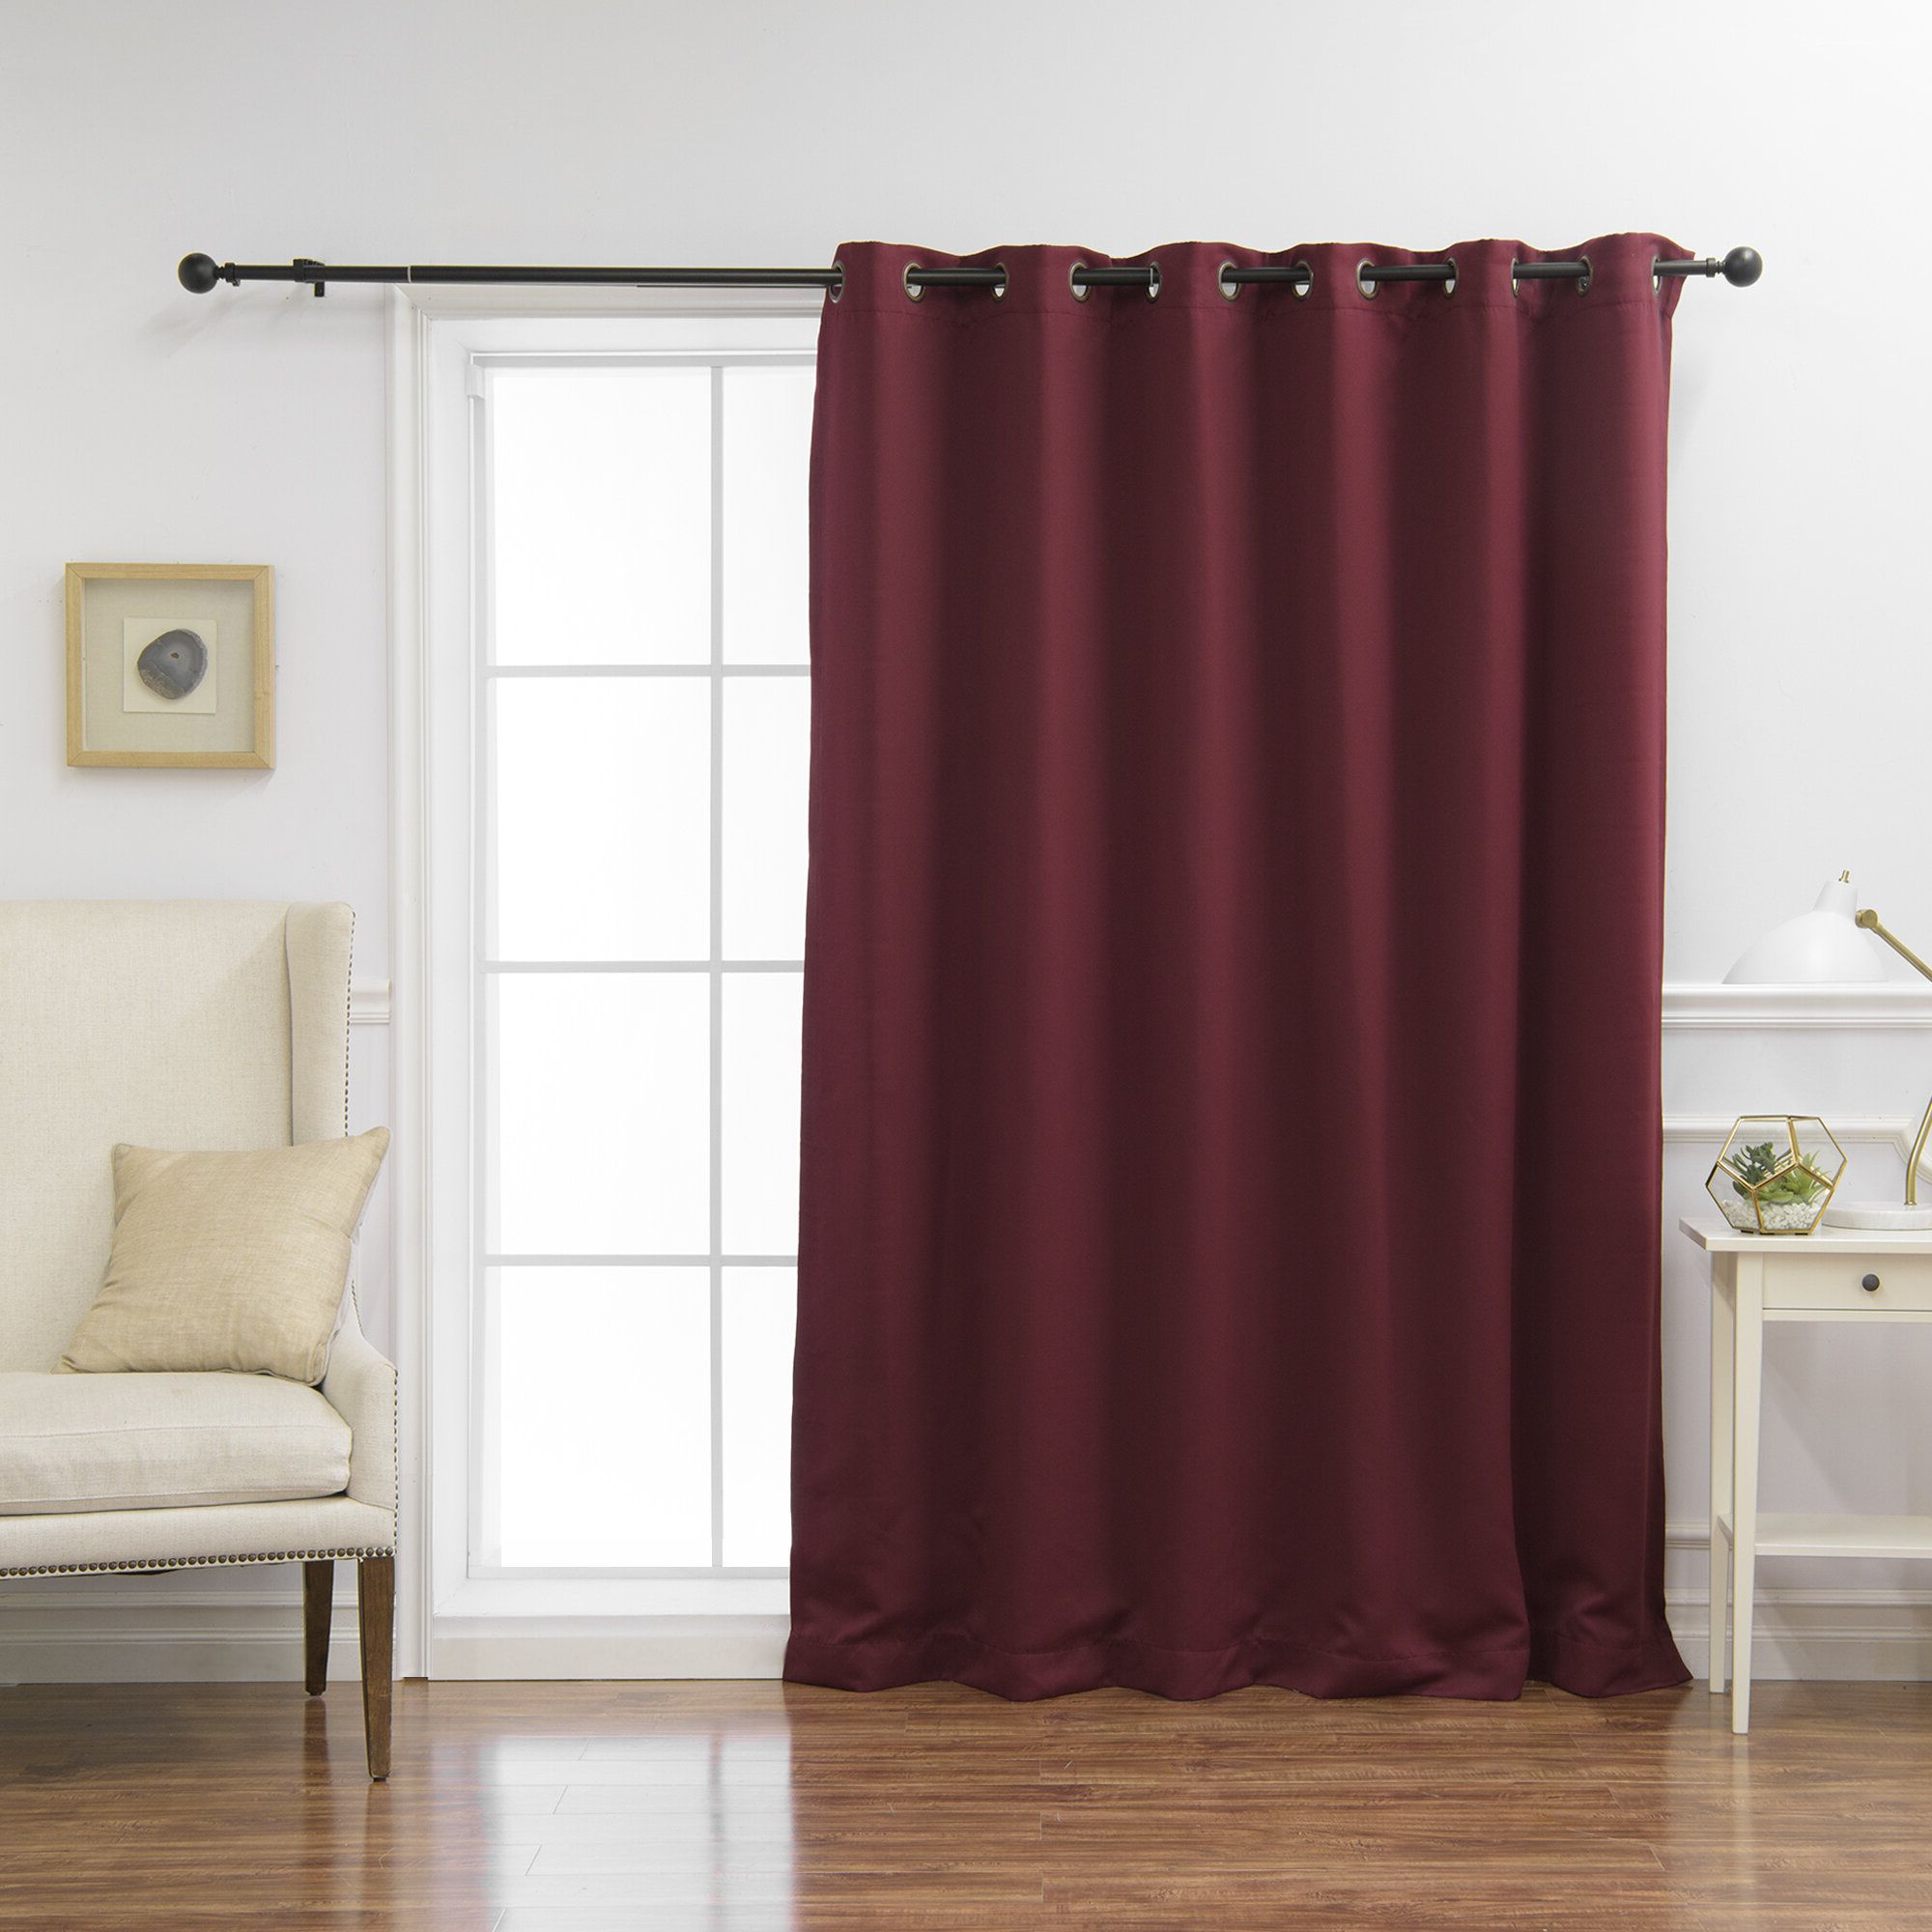 Most Recent Intersect Grommet Woven Print Window Curtain Panels Pertaining To Extra Long Curtains (View 18 of 20)